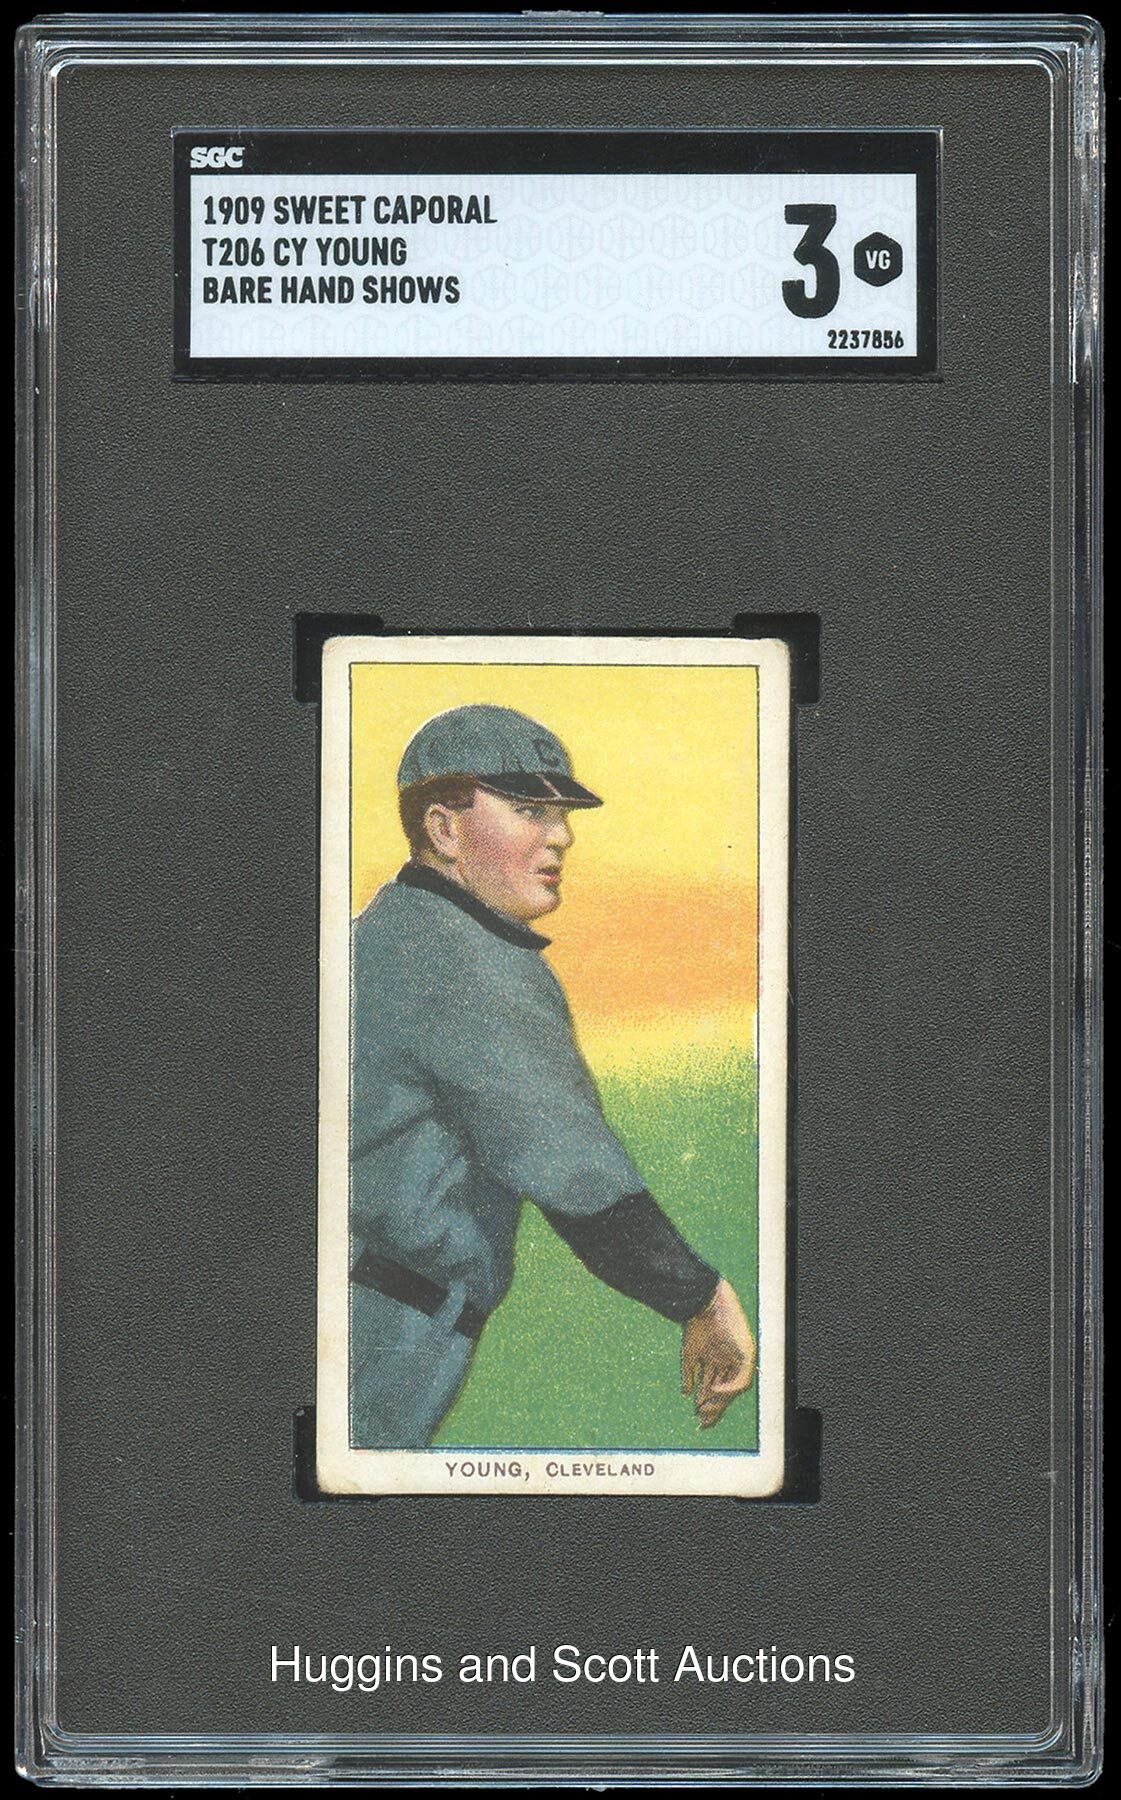 1909-11 T206 White Borders Cy Young (Bare Hand Shows) - SGC 3 VG